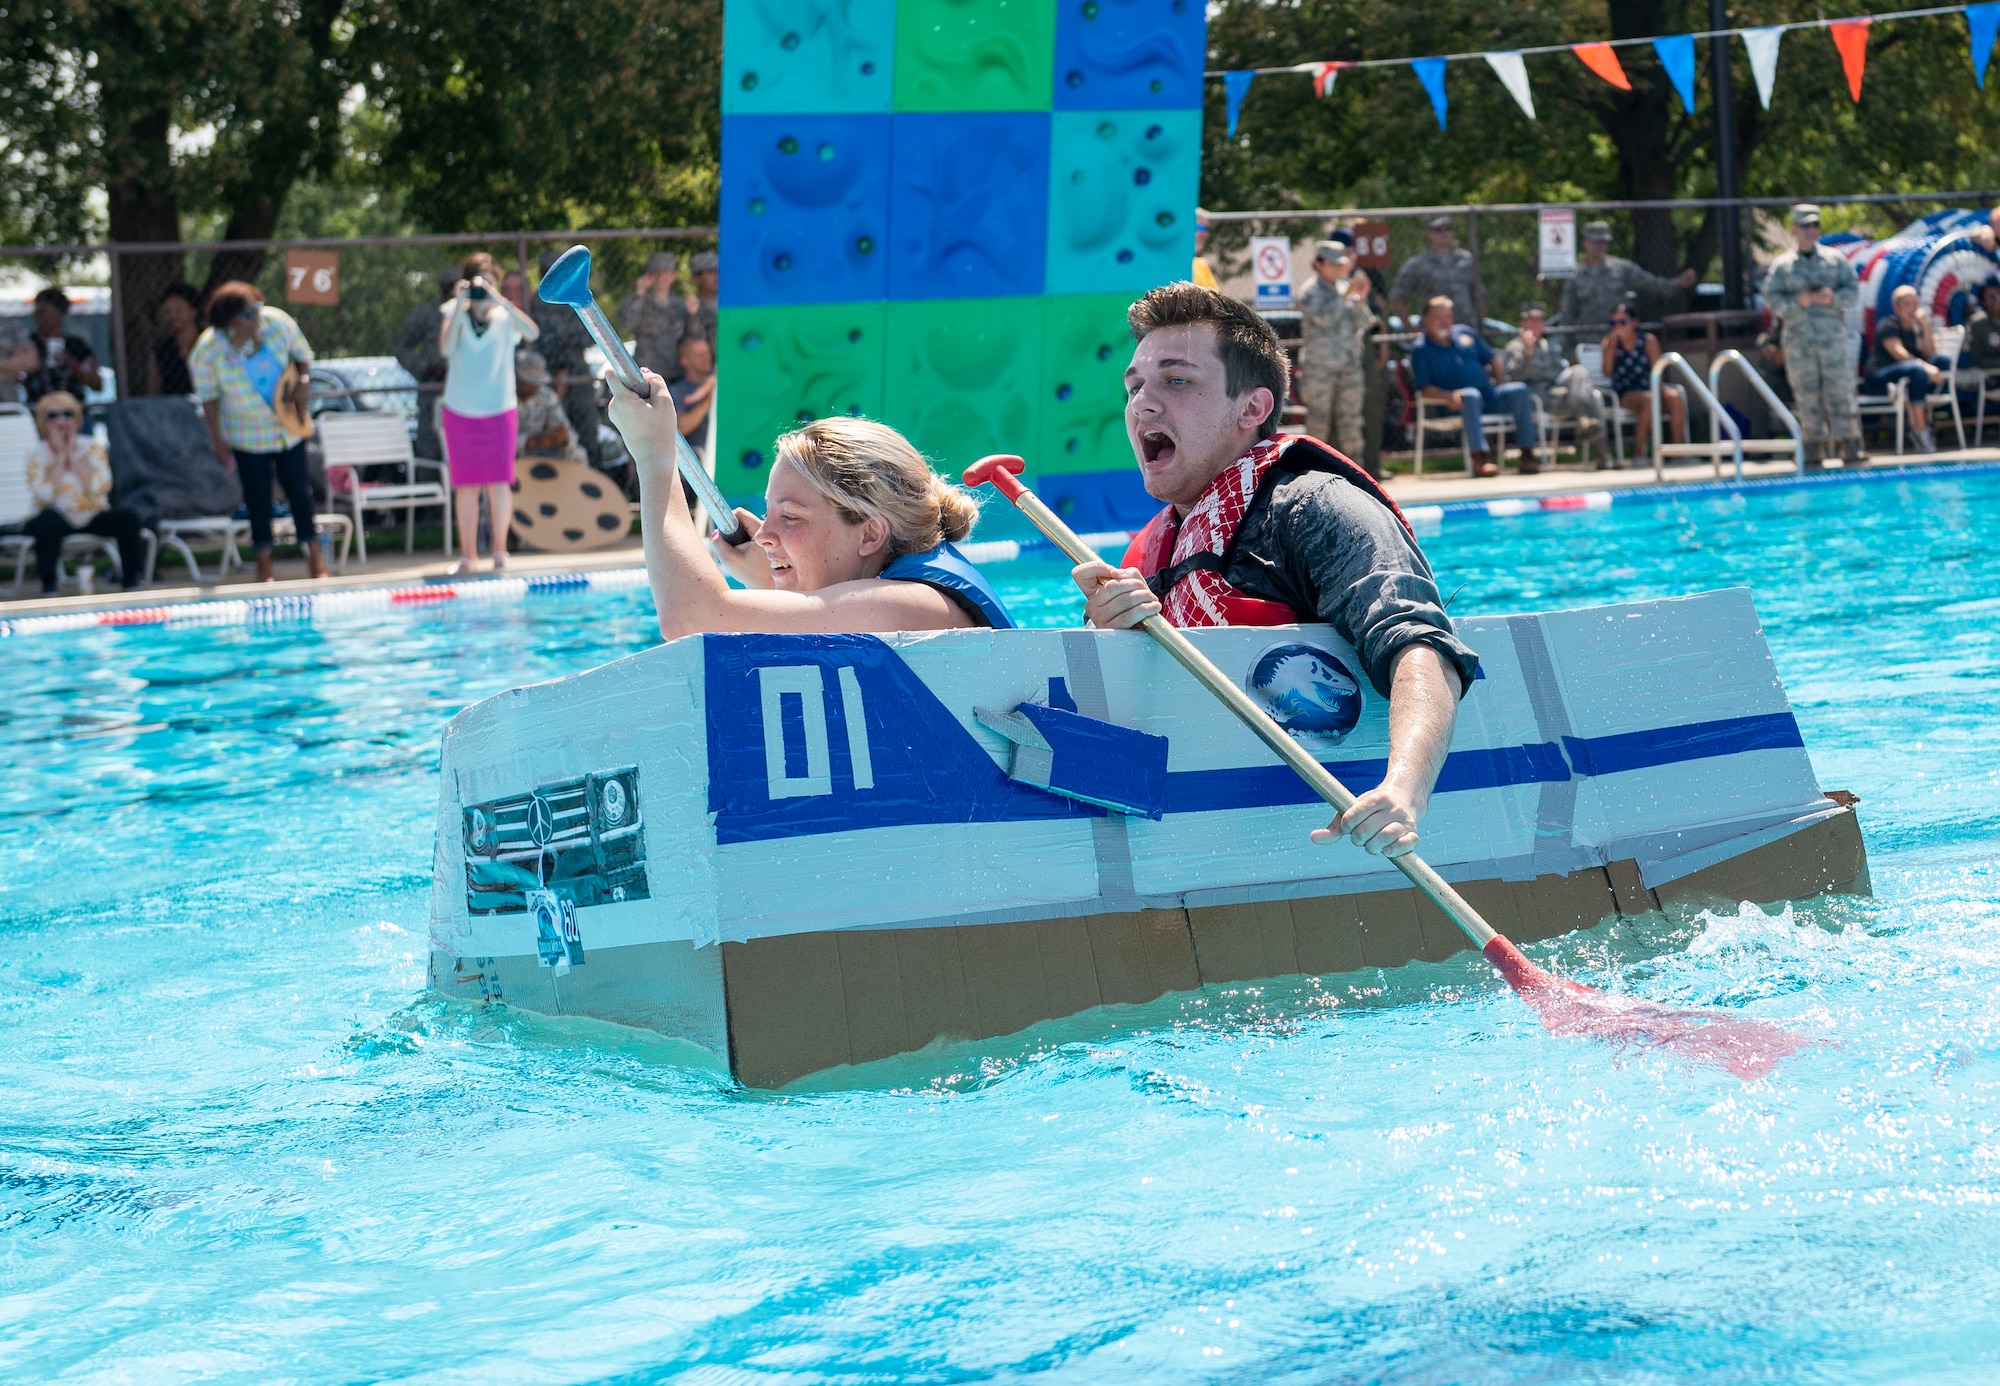 The 375th Force Support Squadron’s Outdoor Recreation held the 11th Annual Cardboard Boat Regatta Aug. 10.